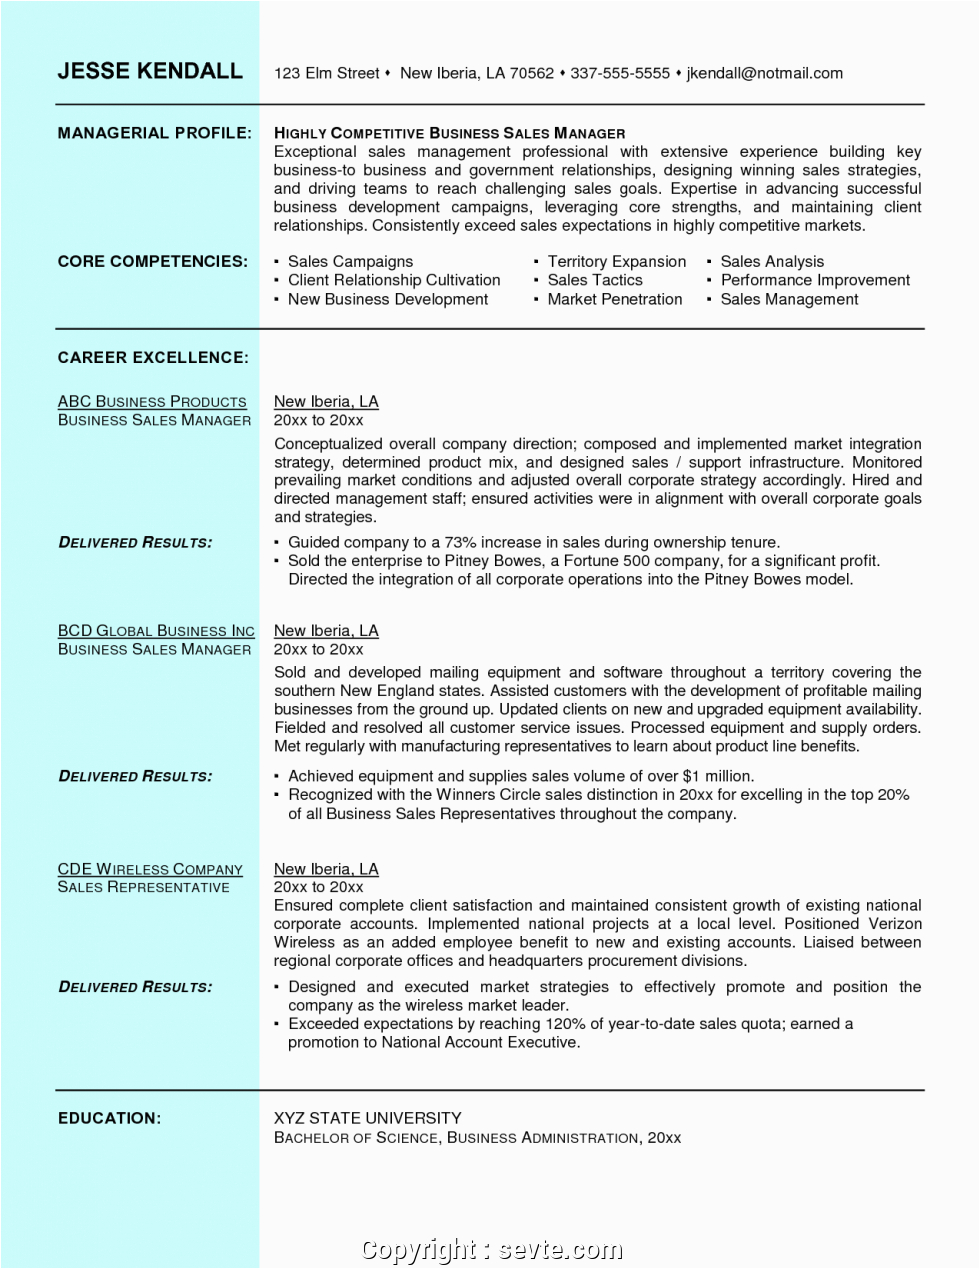 Sample Resume for Sales and Marketing Manager Free Resume format for Sales and Marketing Manager Sample